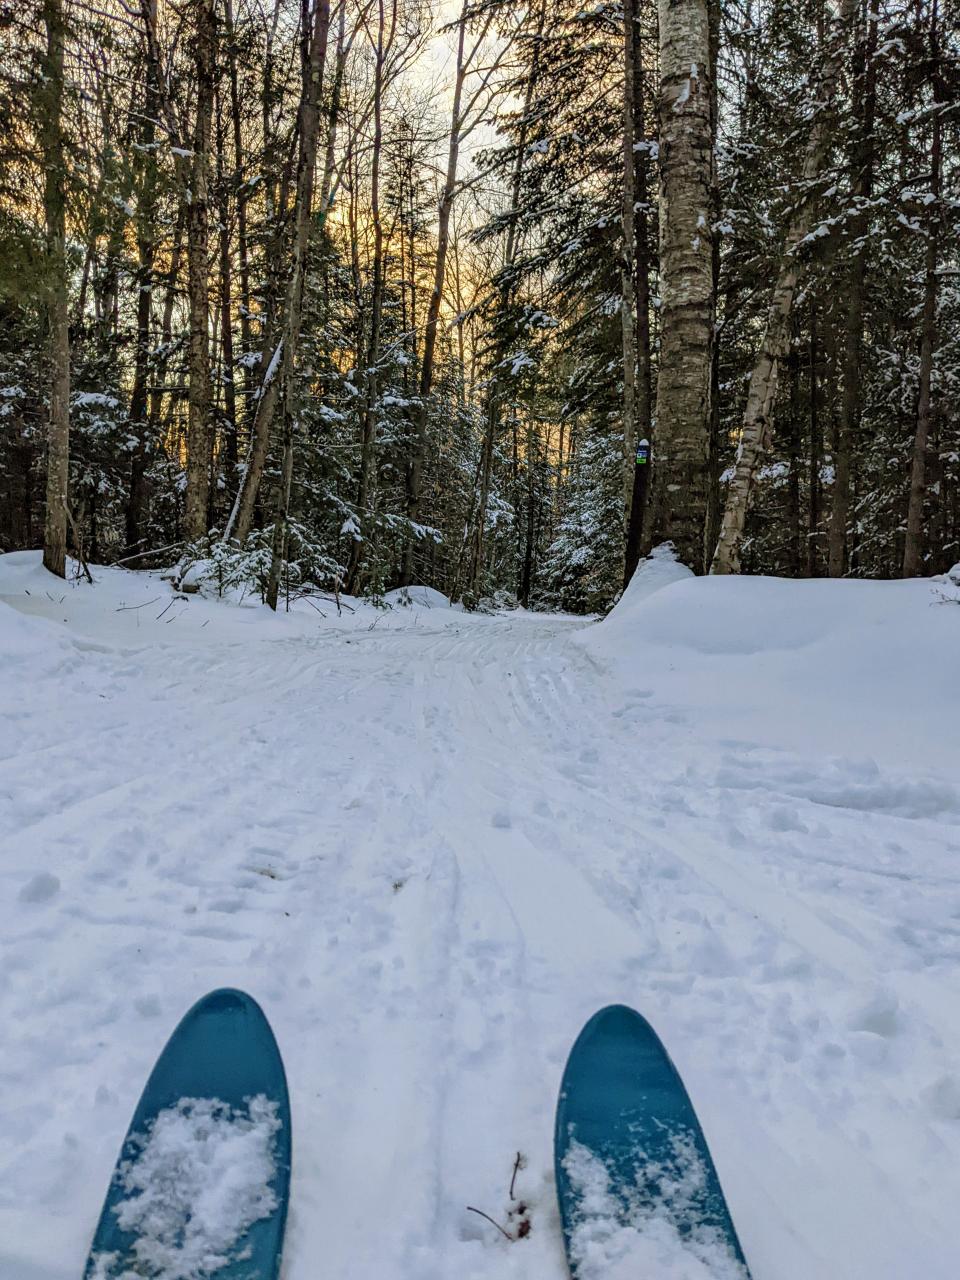 A pair of skis point towards an open, snow-covered trail through the woods.